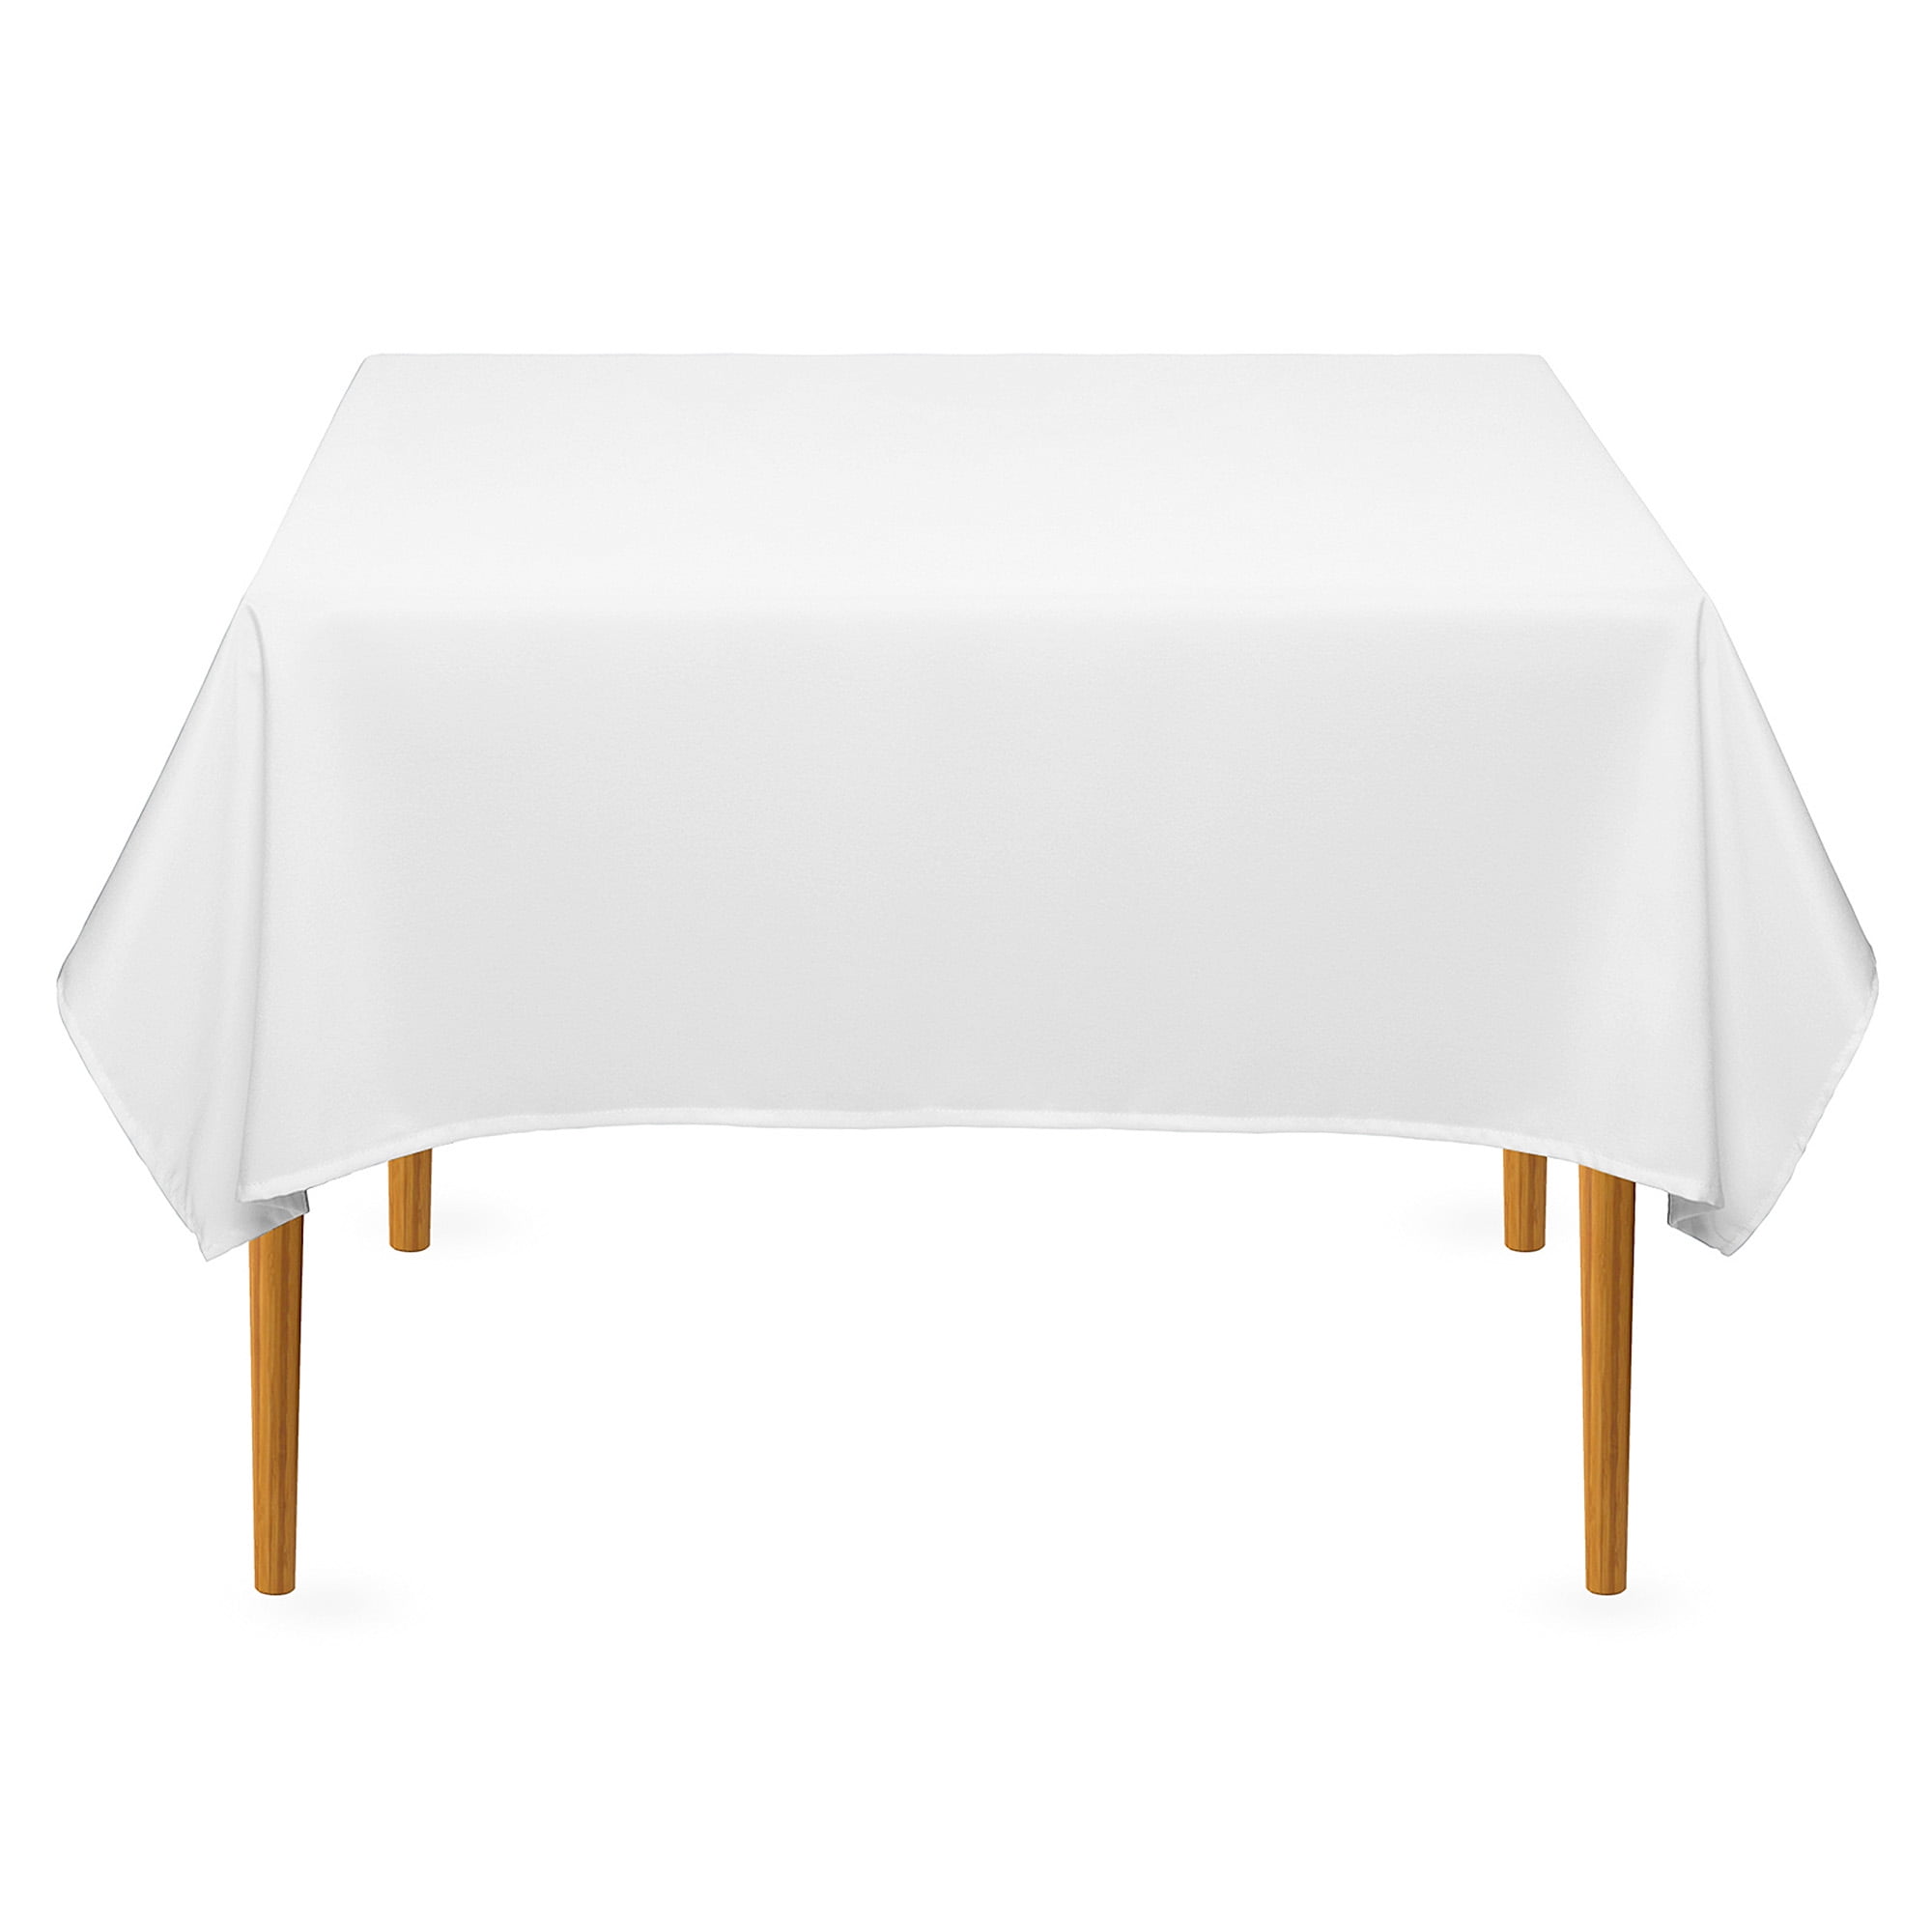 10 packs Square Tablecloths 54"x 54" inch USA Polyester Party Overlay 23 COLORS 